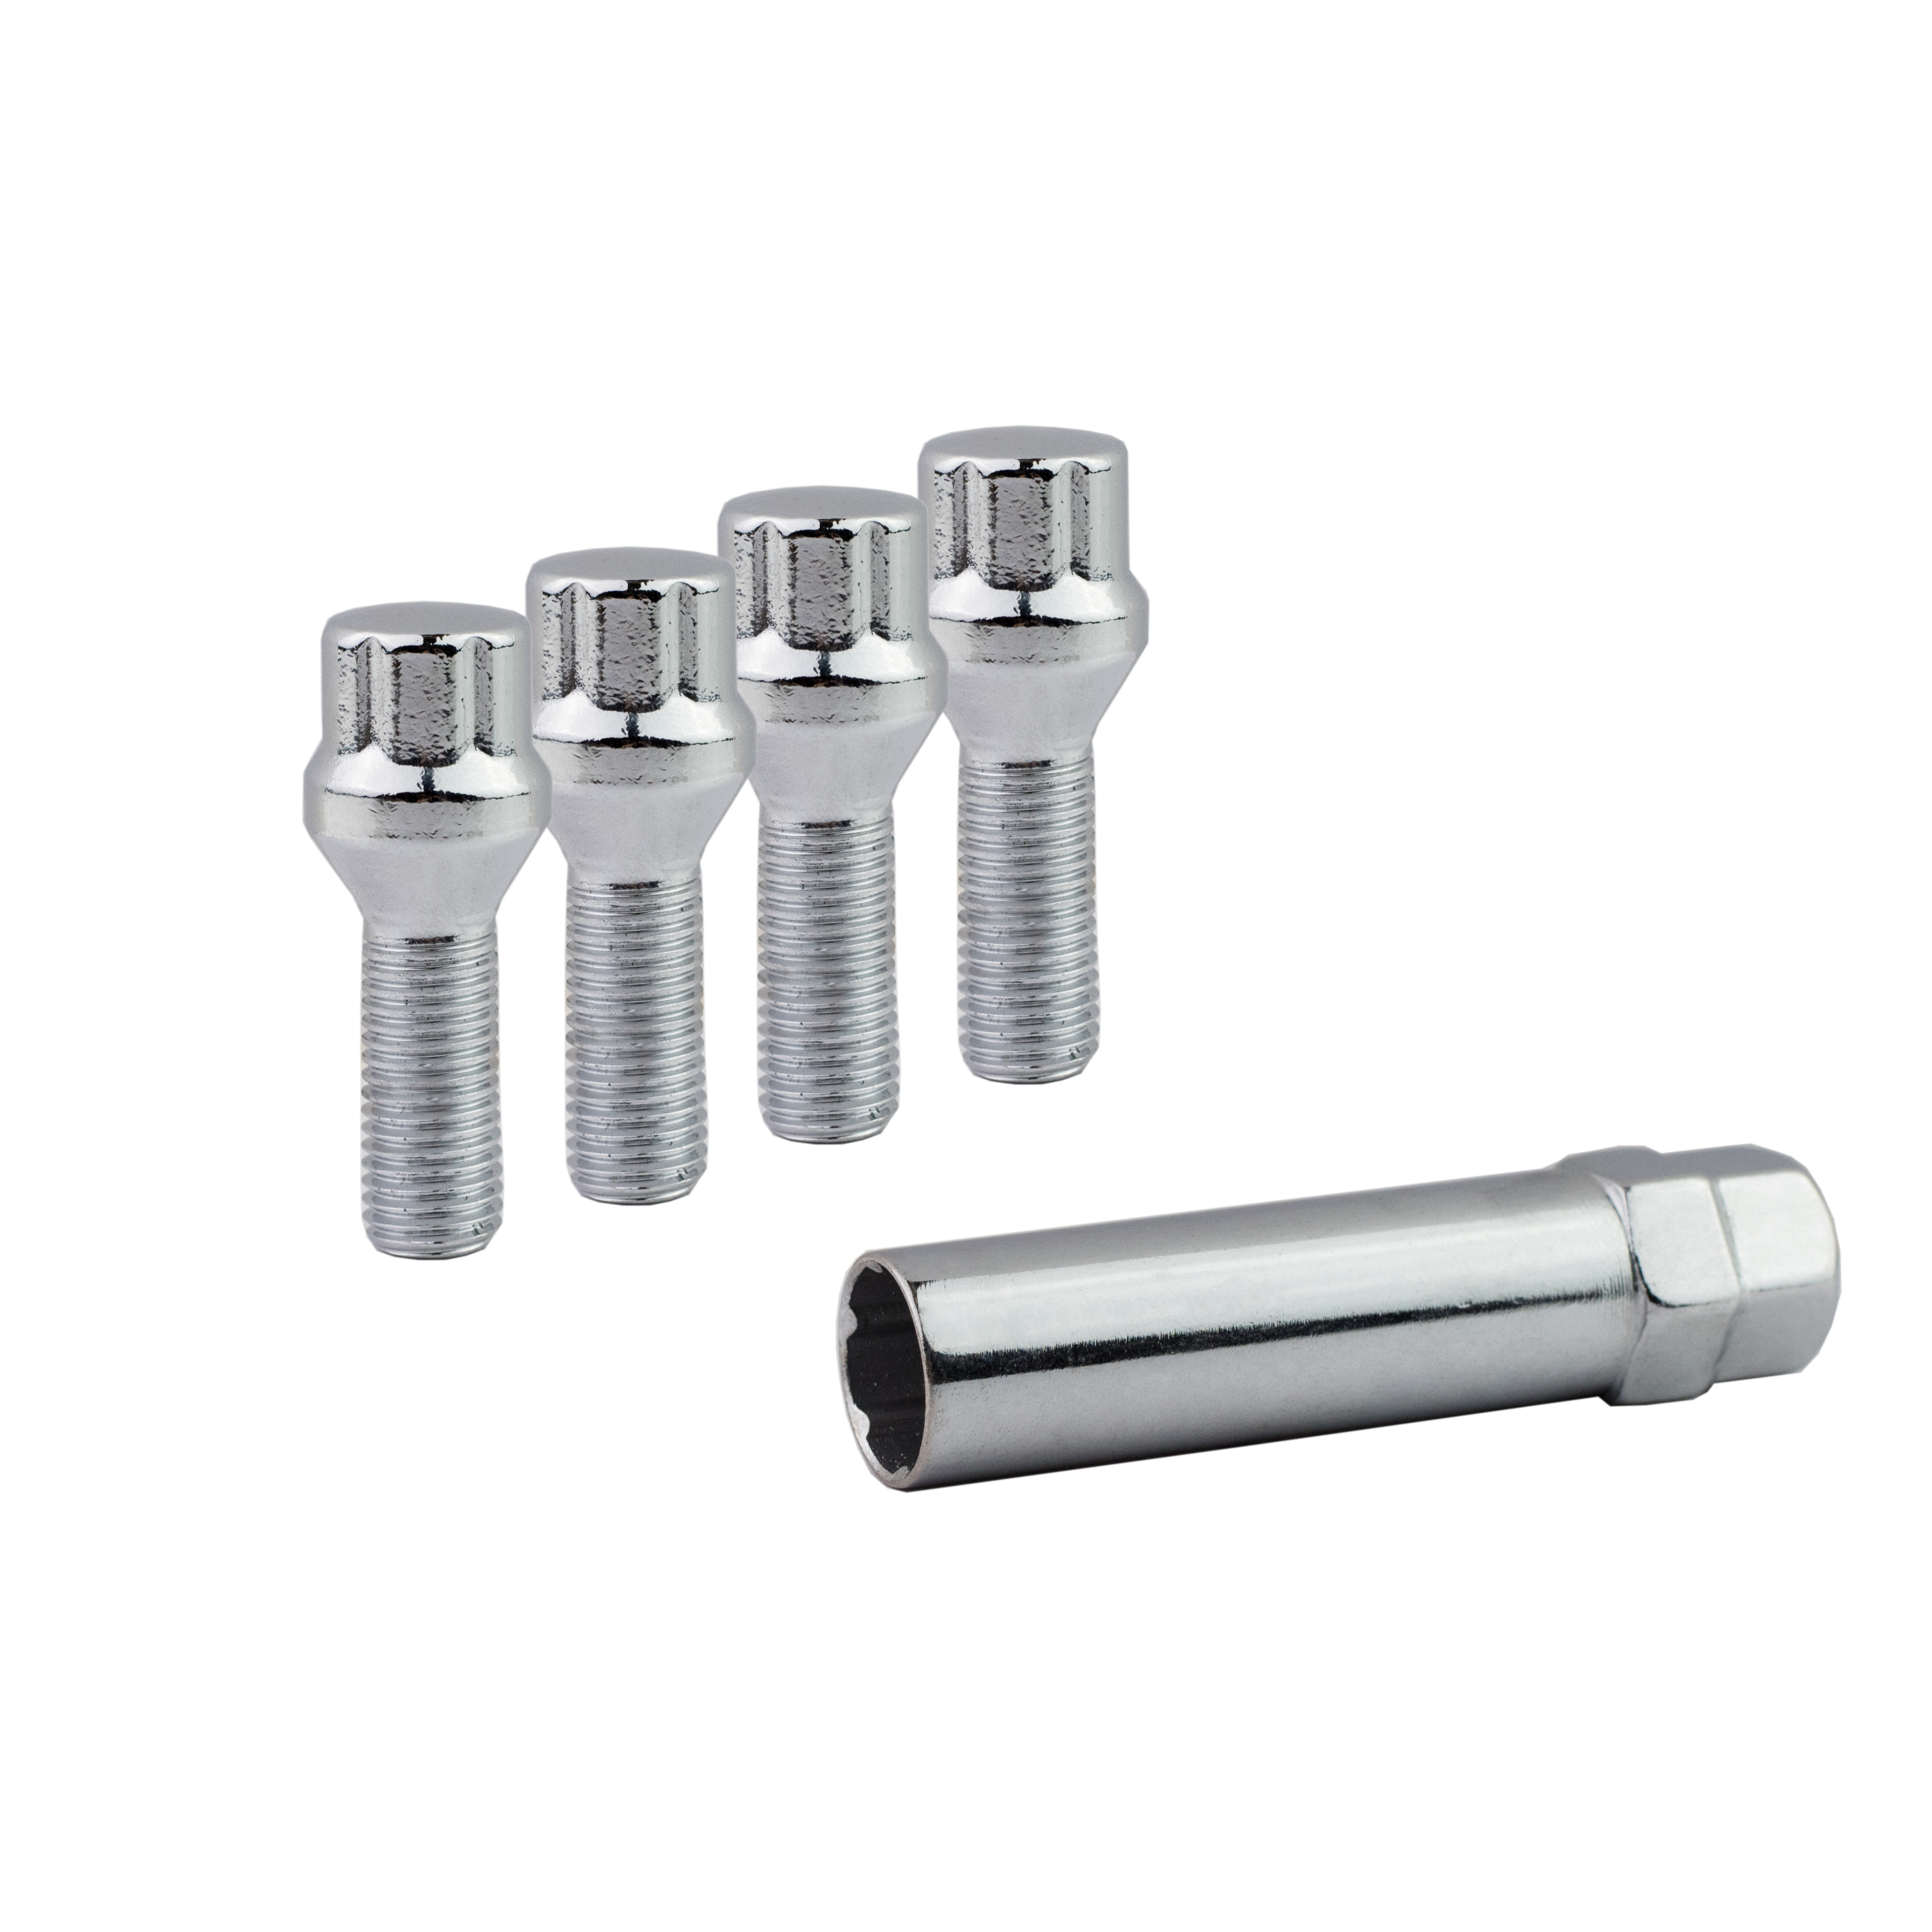 Wheel Lug Bolts with different size thread and OEM made